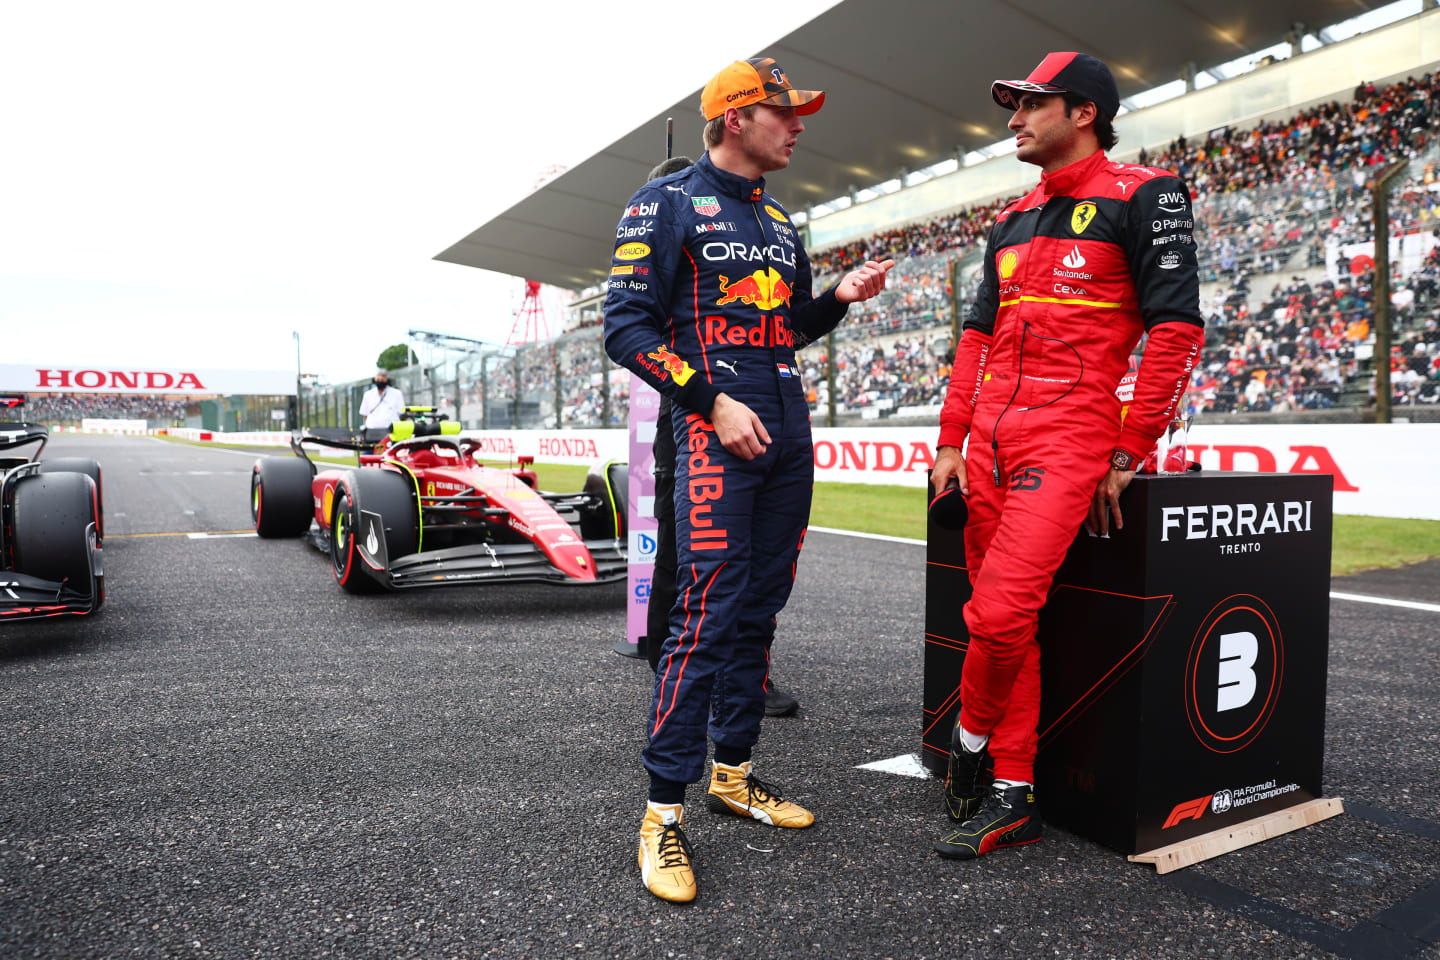 SUZUKA, JAPAN - OCTOBER 08: Pole position qualifier Max Verstappen of the Netherlands and Oracle